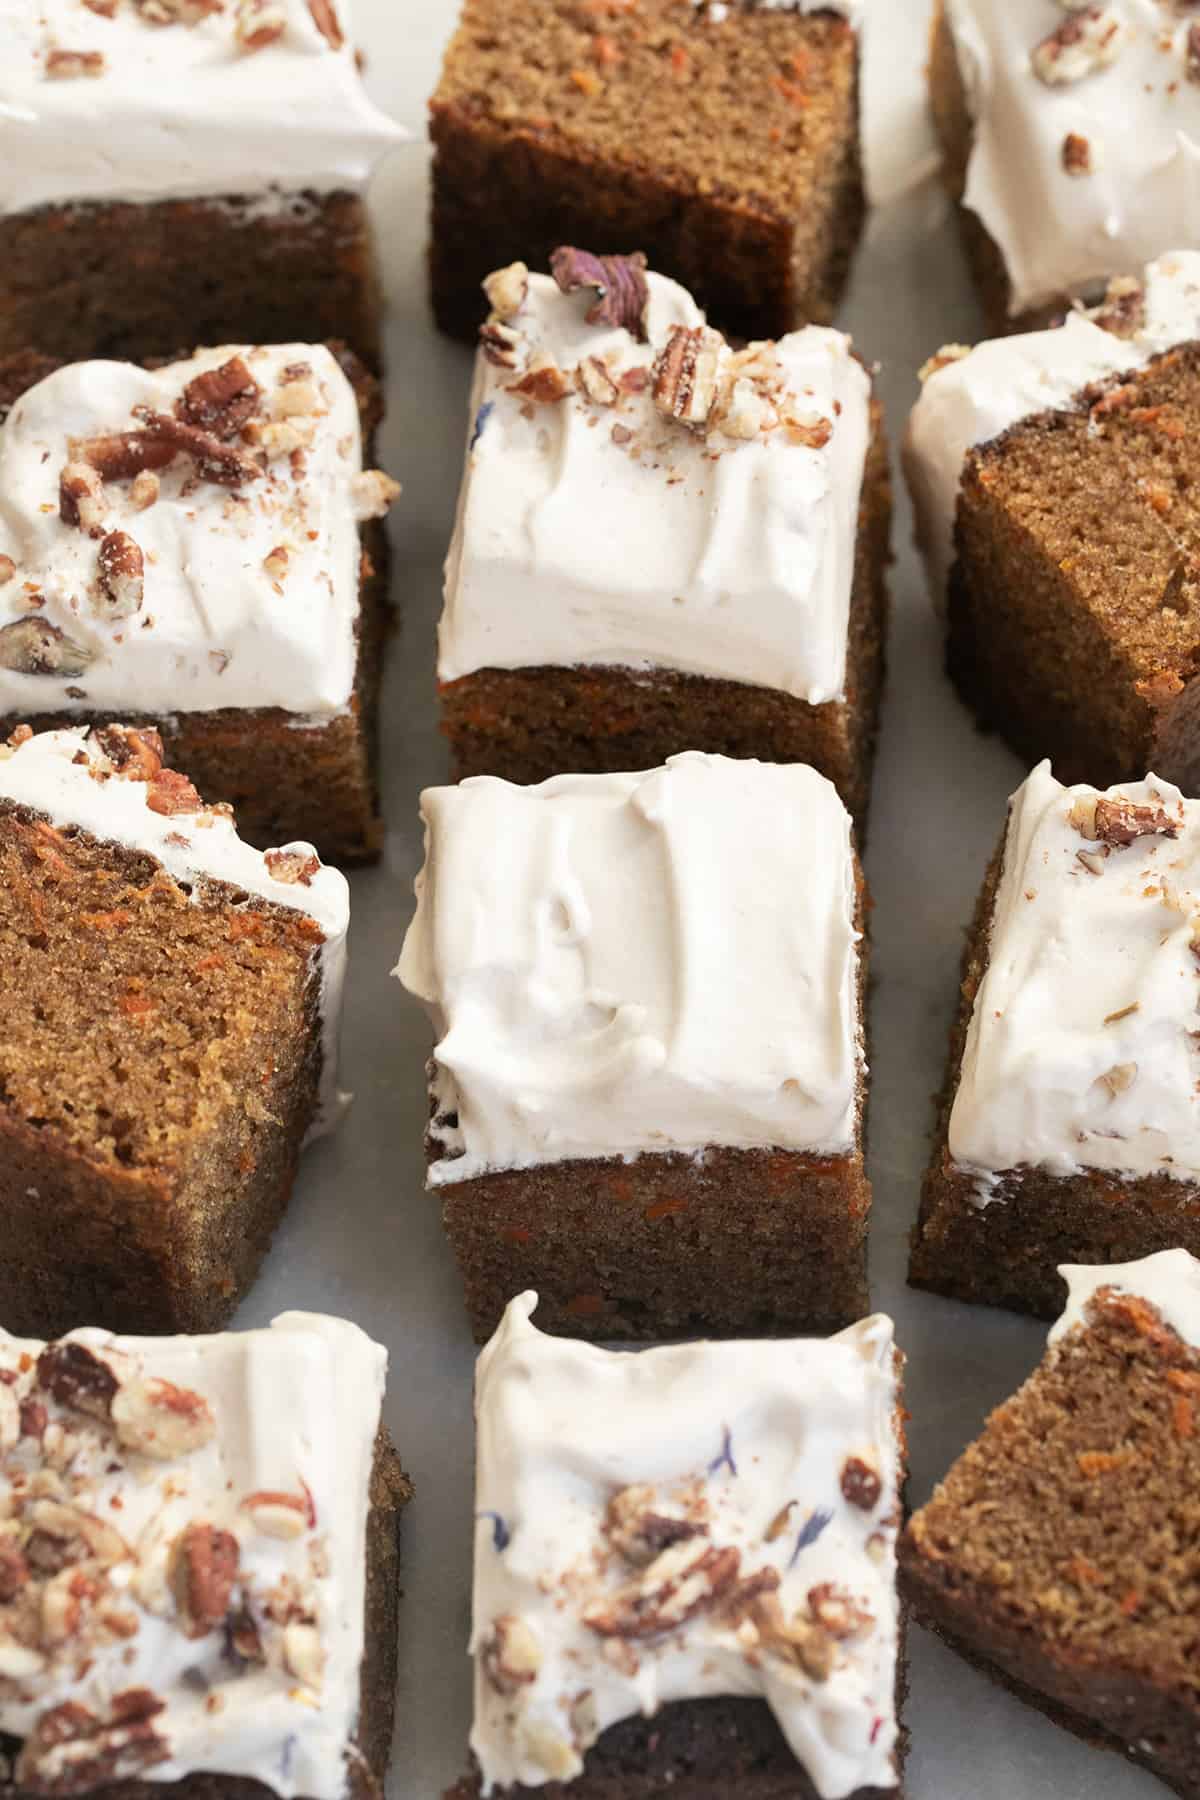 Slices of moist carrot cake with maple syrup frosting.